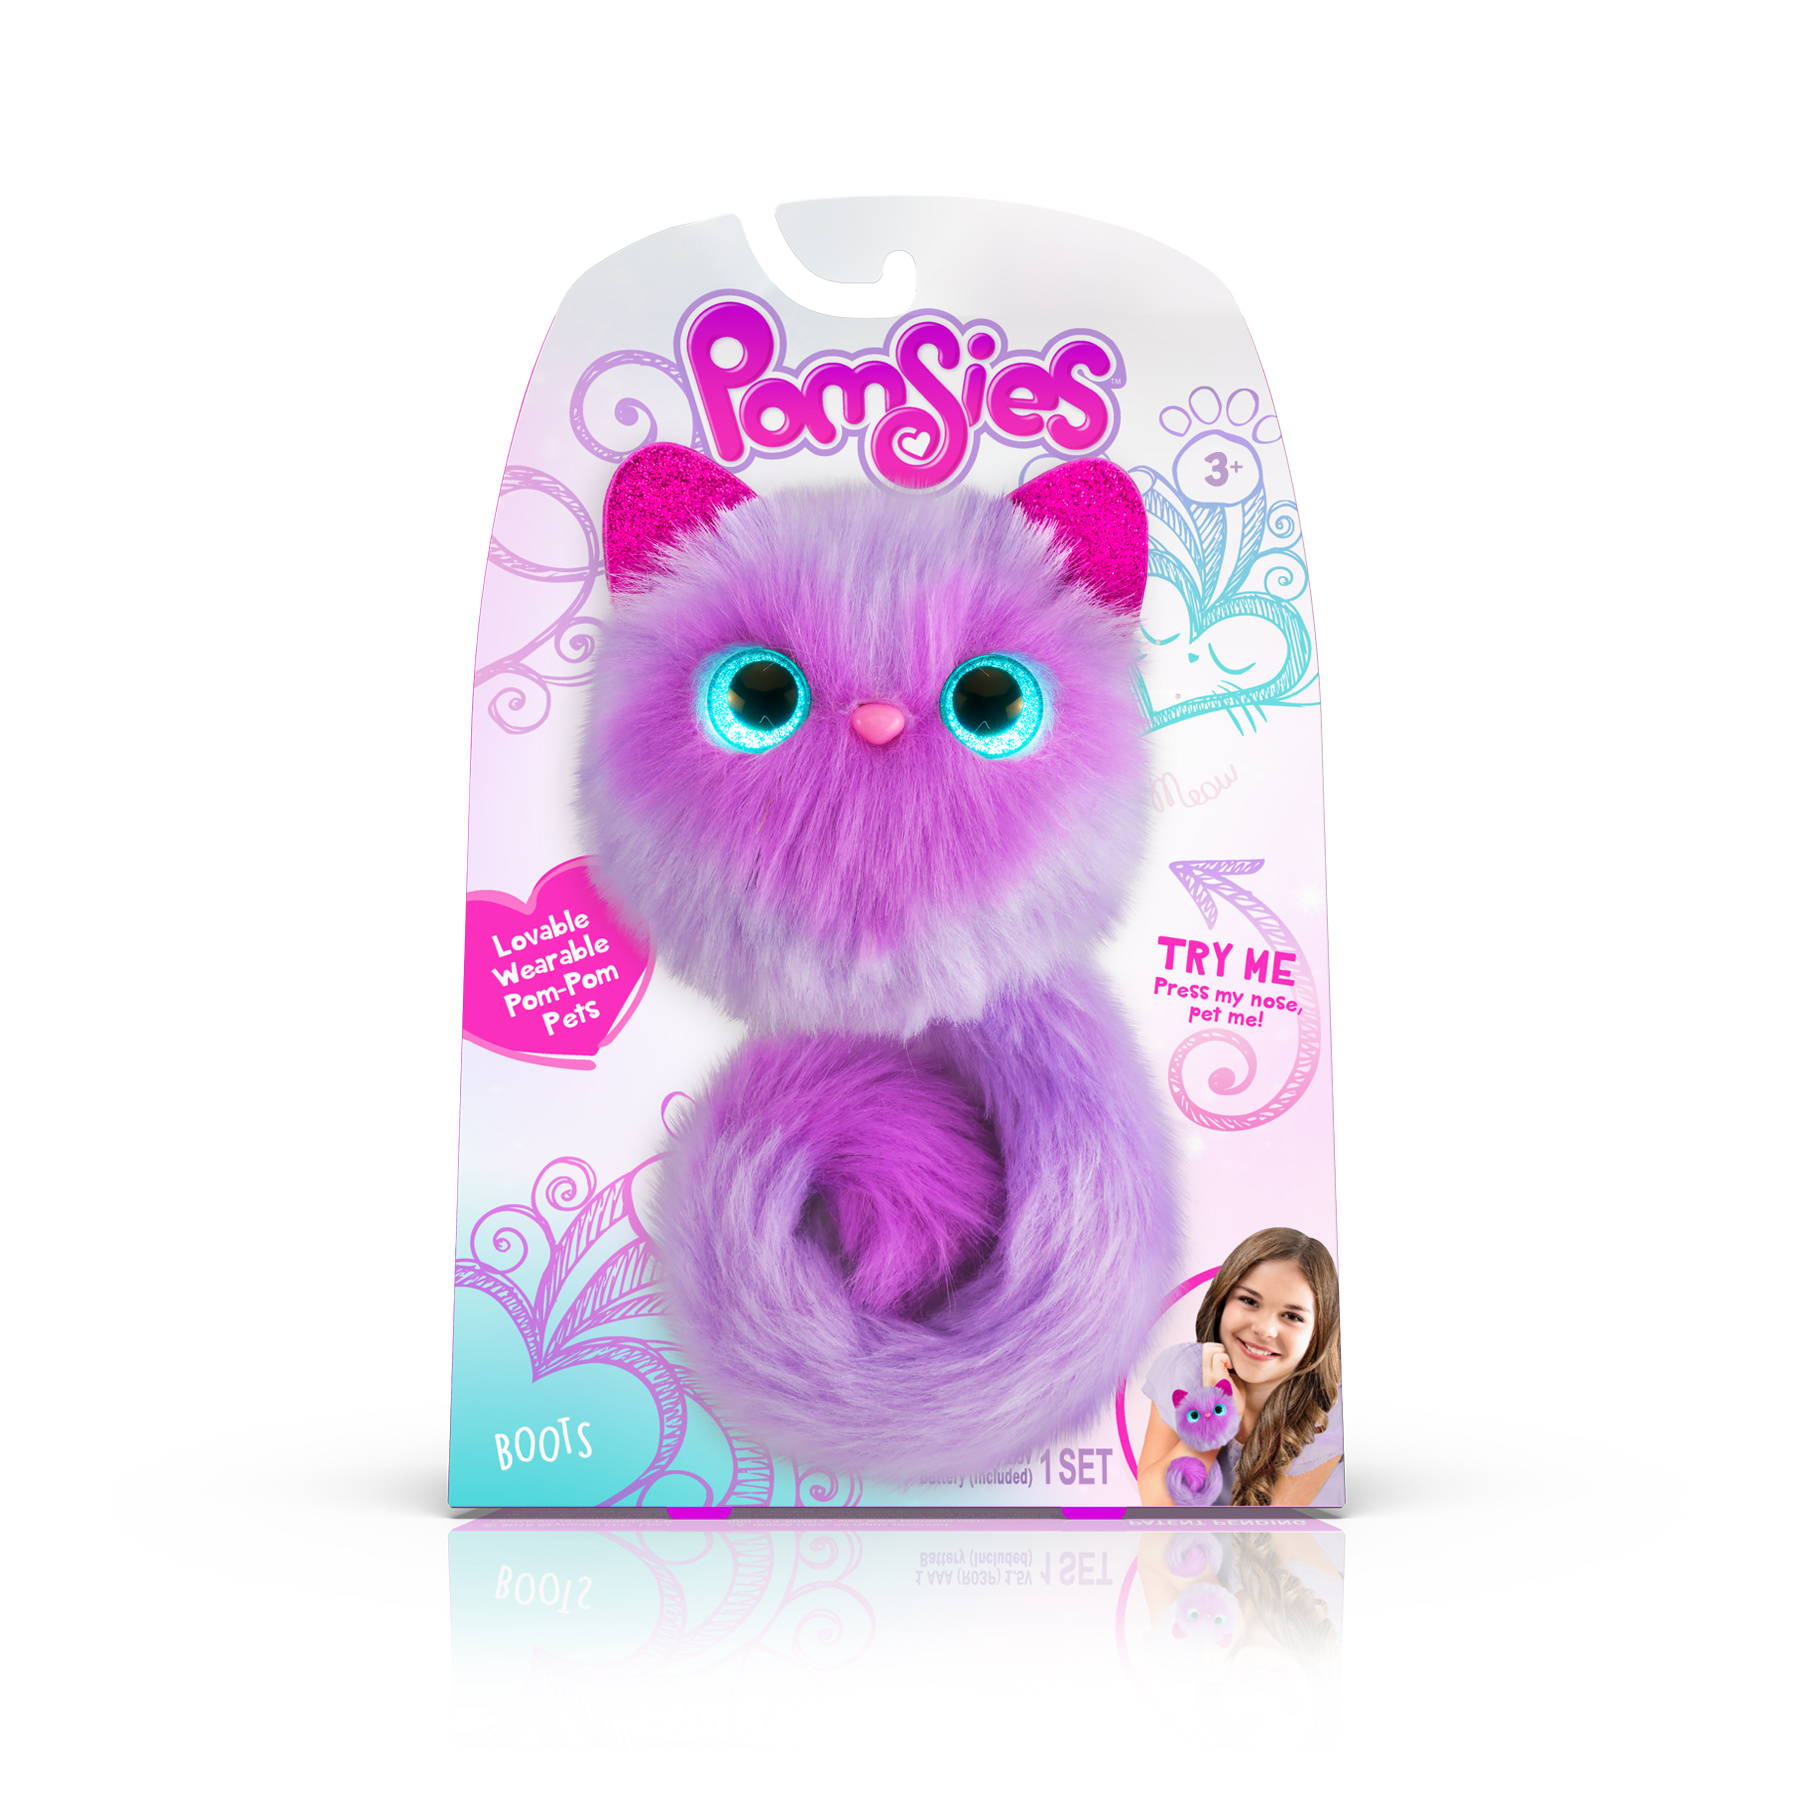 Pomsies Pet Boots- Plush Interactive Toy - image 1 of 4